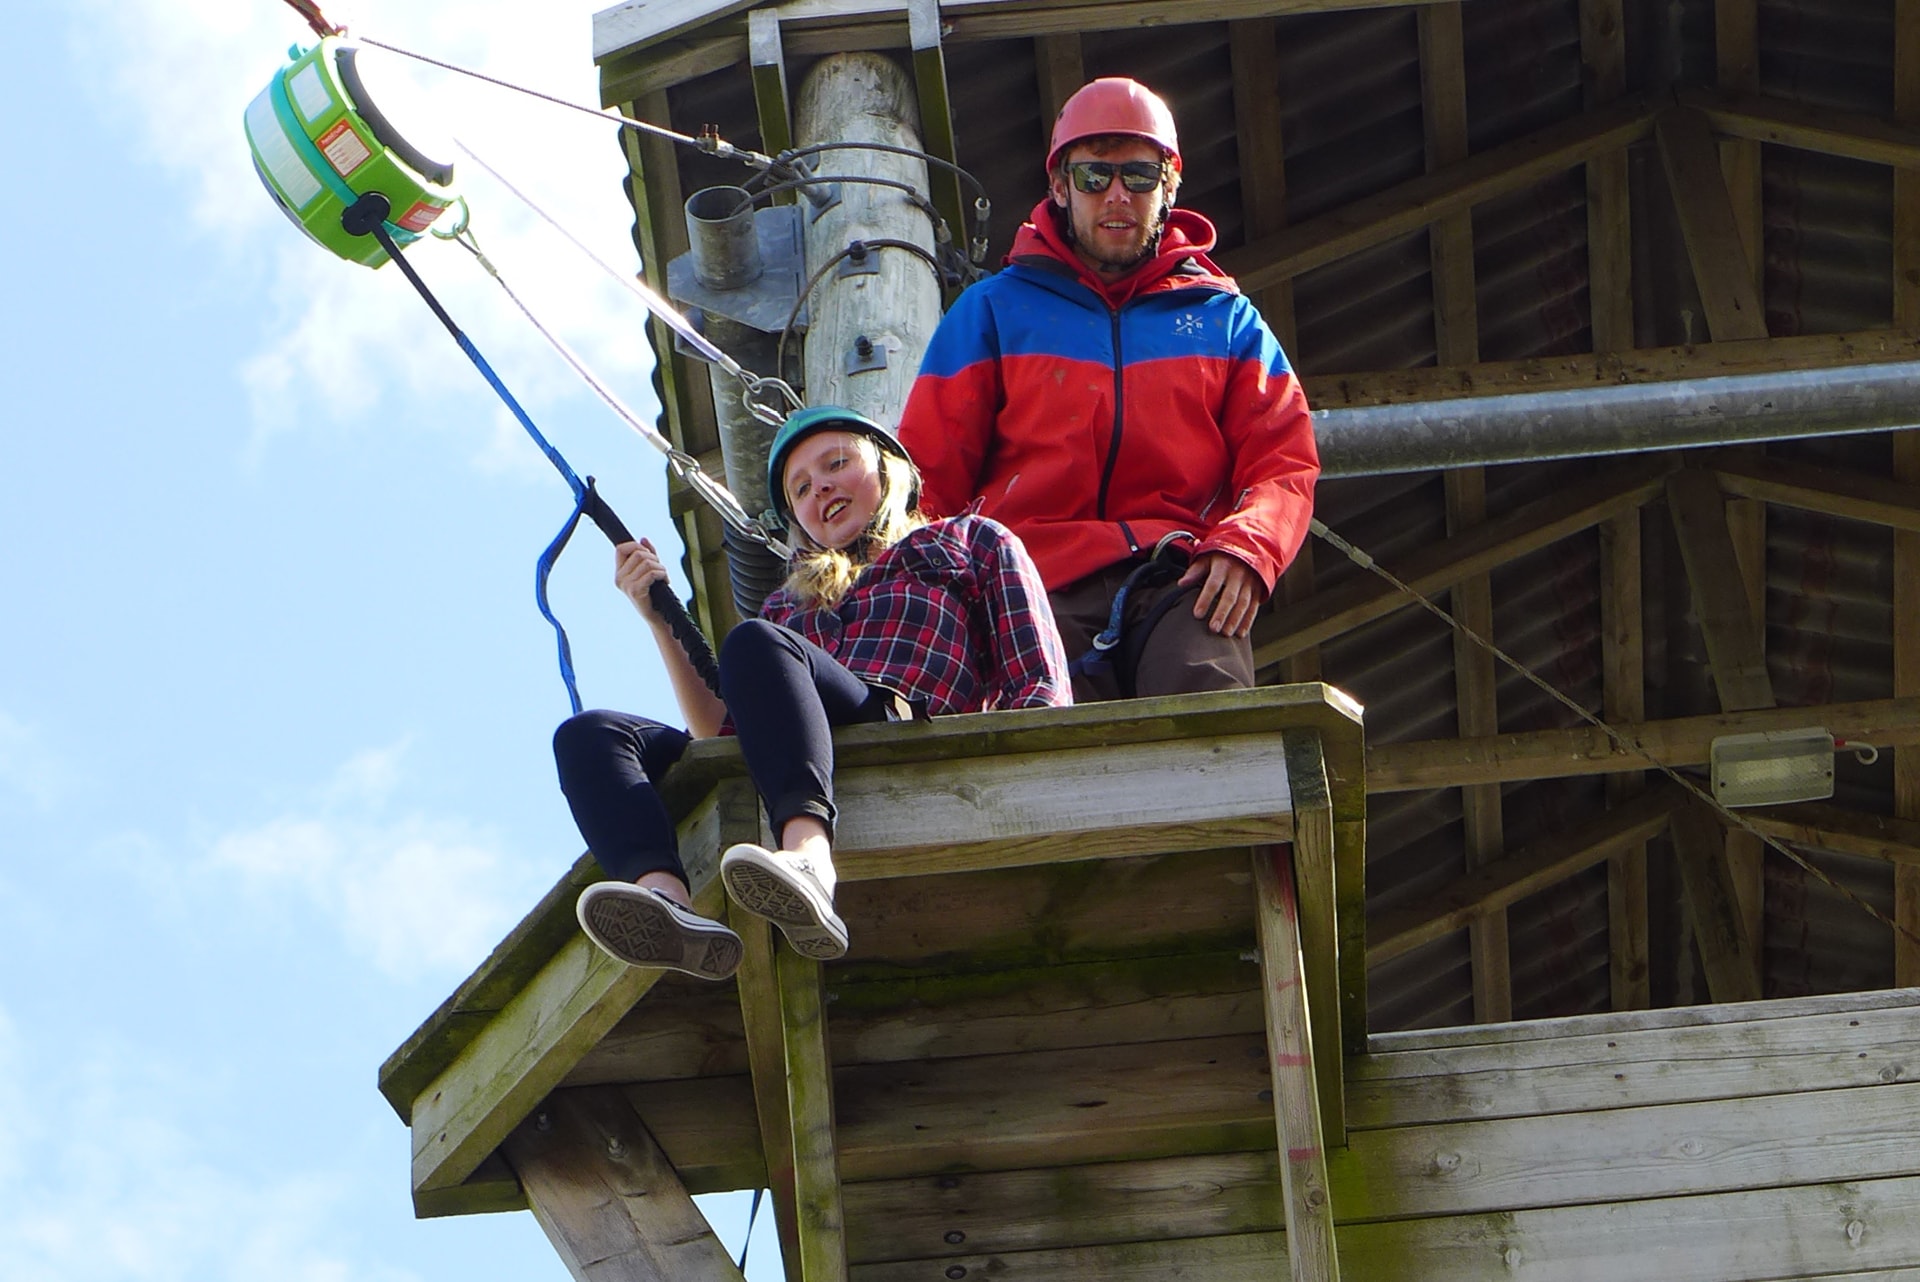 Student zip lining on study abroad trip